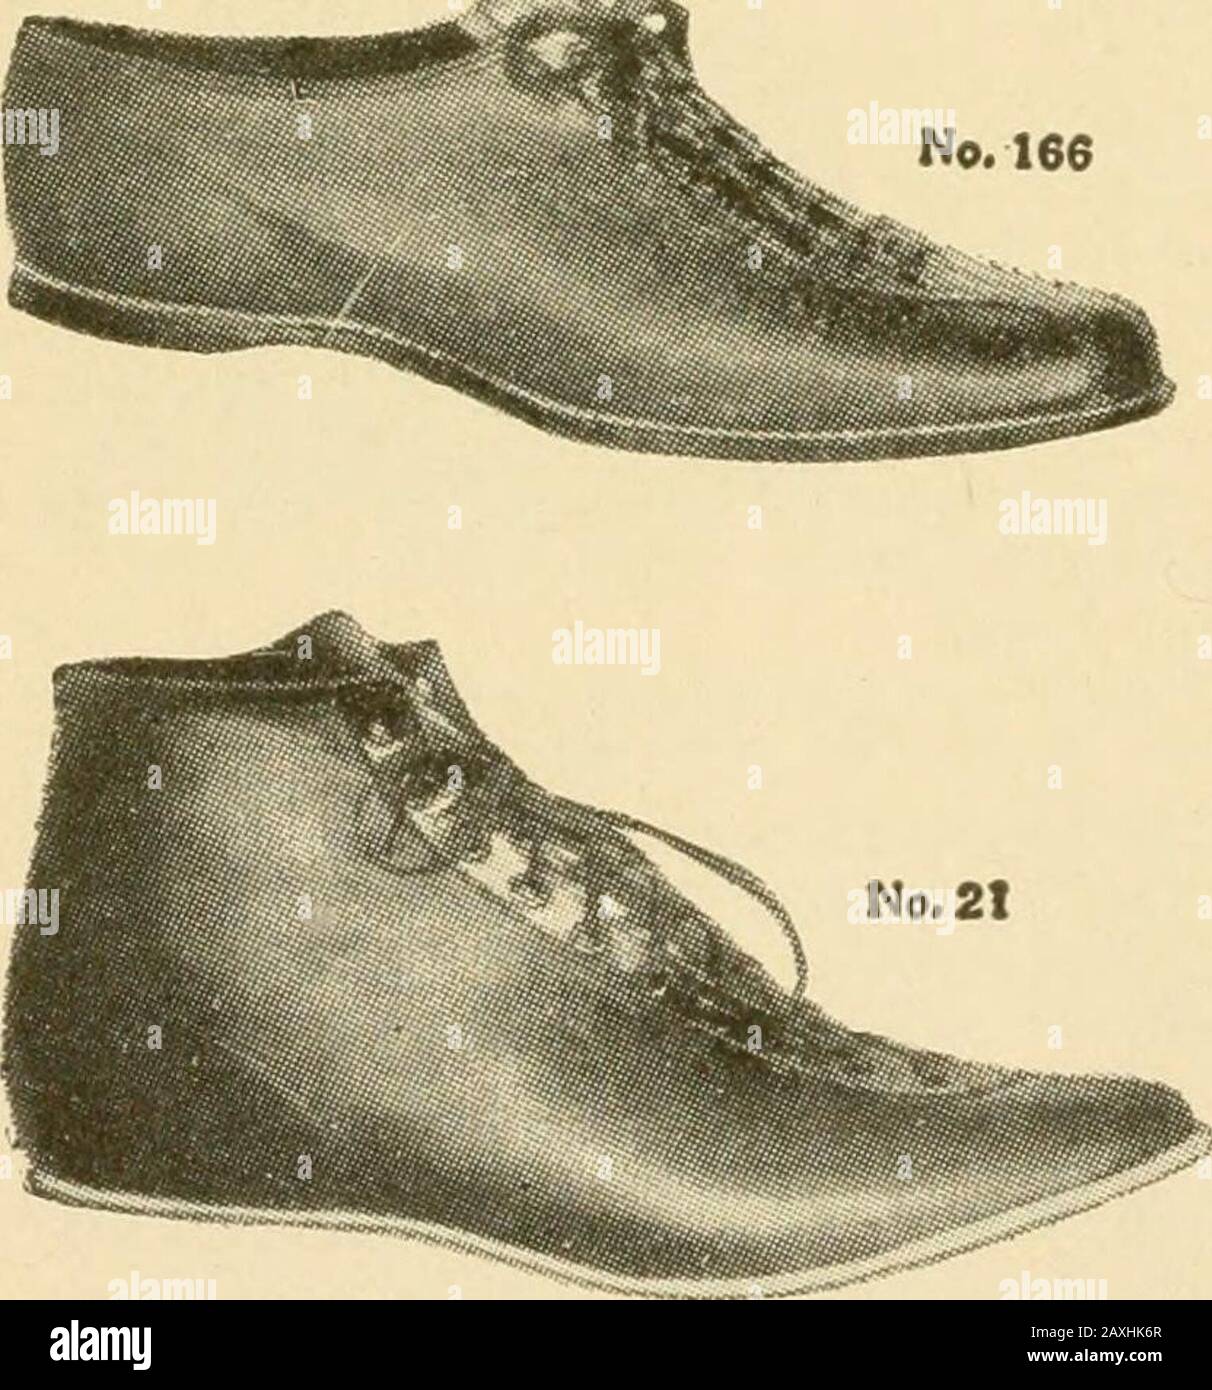 Graded calisthenic and dumb bell drills . No. 15 Correct Shoes for Boxing No. 166. No. 15. High cut, kangaroo uppers,genuine elkskinsoles. Will not slipon floor; extra light.The correct shoesto wear for boxing. Pair, $6.00No. 155. High cut,elkskin soles, andwill not slip on floor;soft and flexible. Pair. $5.00No. 166. Low cut.selected leather, ex-tra light and electricsoles, mens size5only. Pair, $4.00No. 66L. Womens.Low cut, extra light,selected leather up-pers. Electric soles. Pair, $4.00No. 21. High cut,blackleather, electricsoles. Sewed andturned, which makesshoes extremelylight and flexib Stock Photo